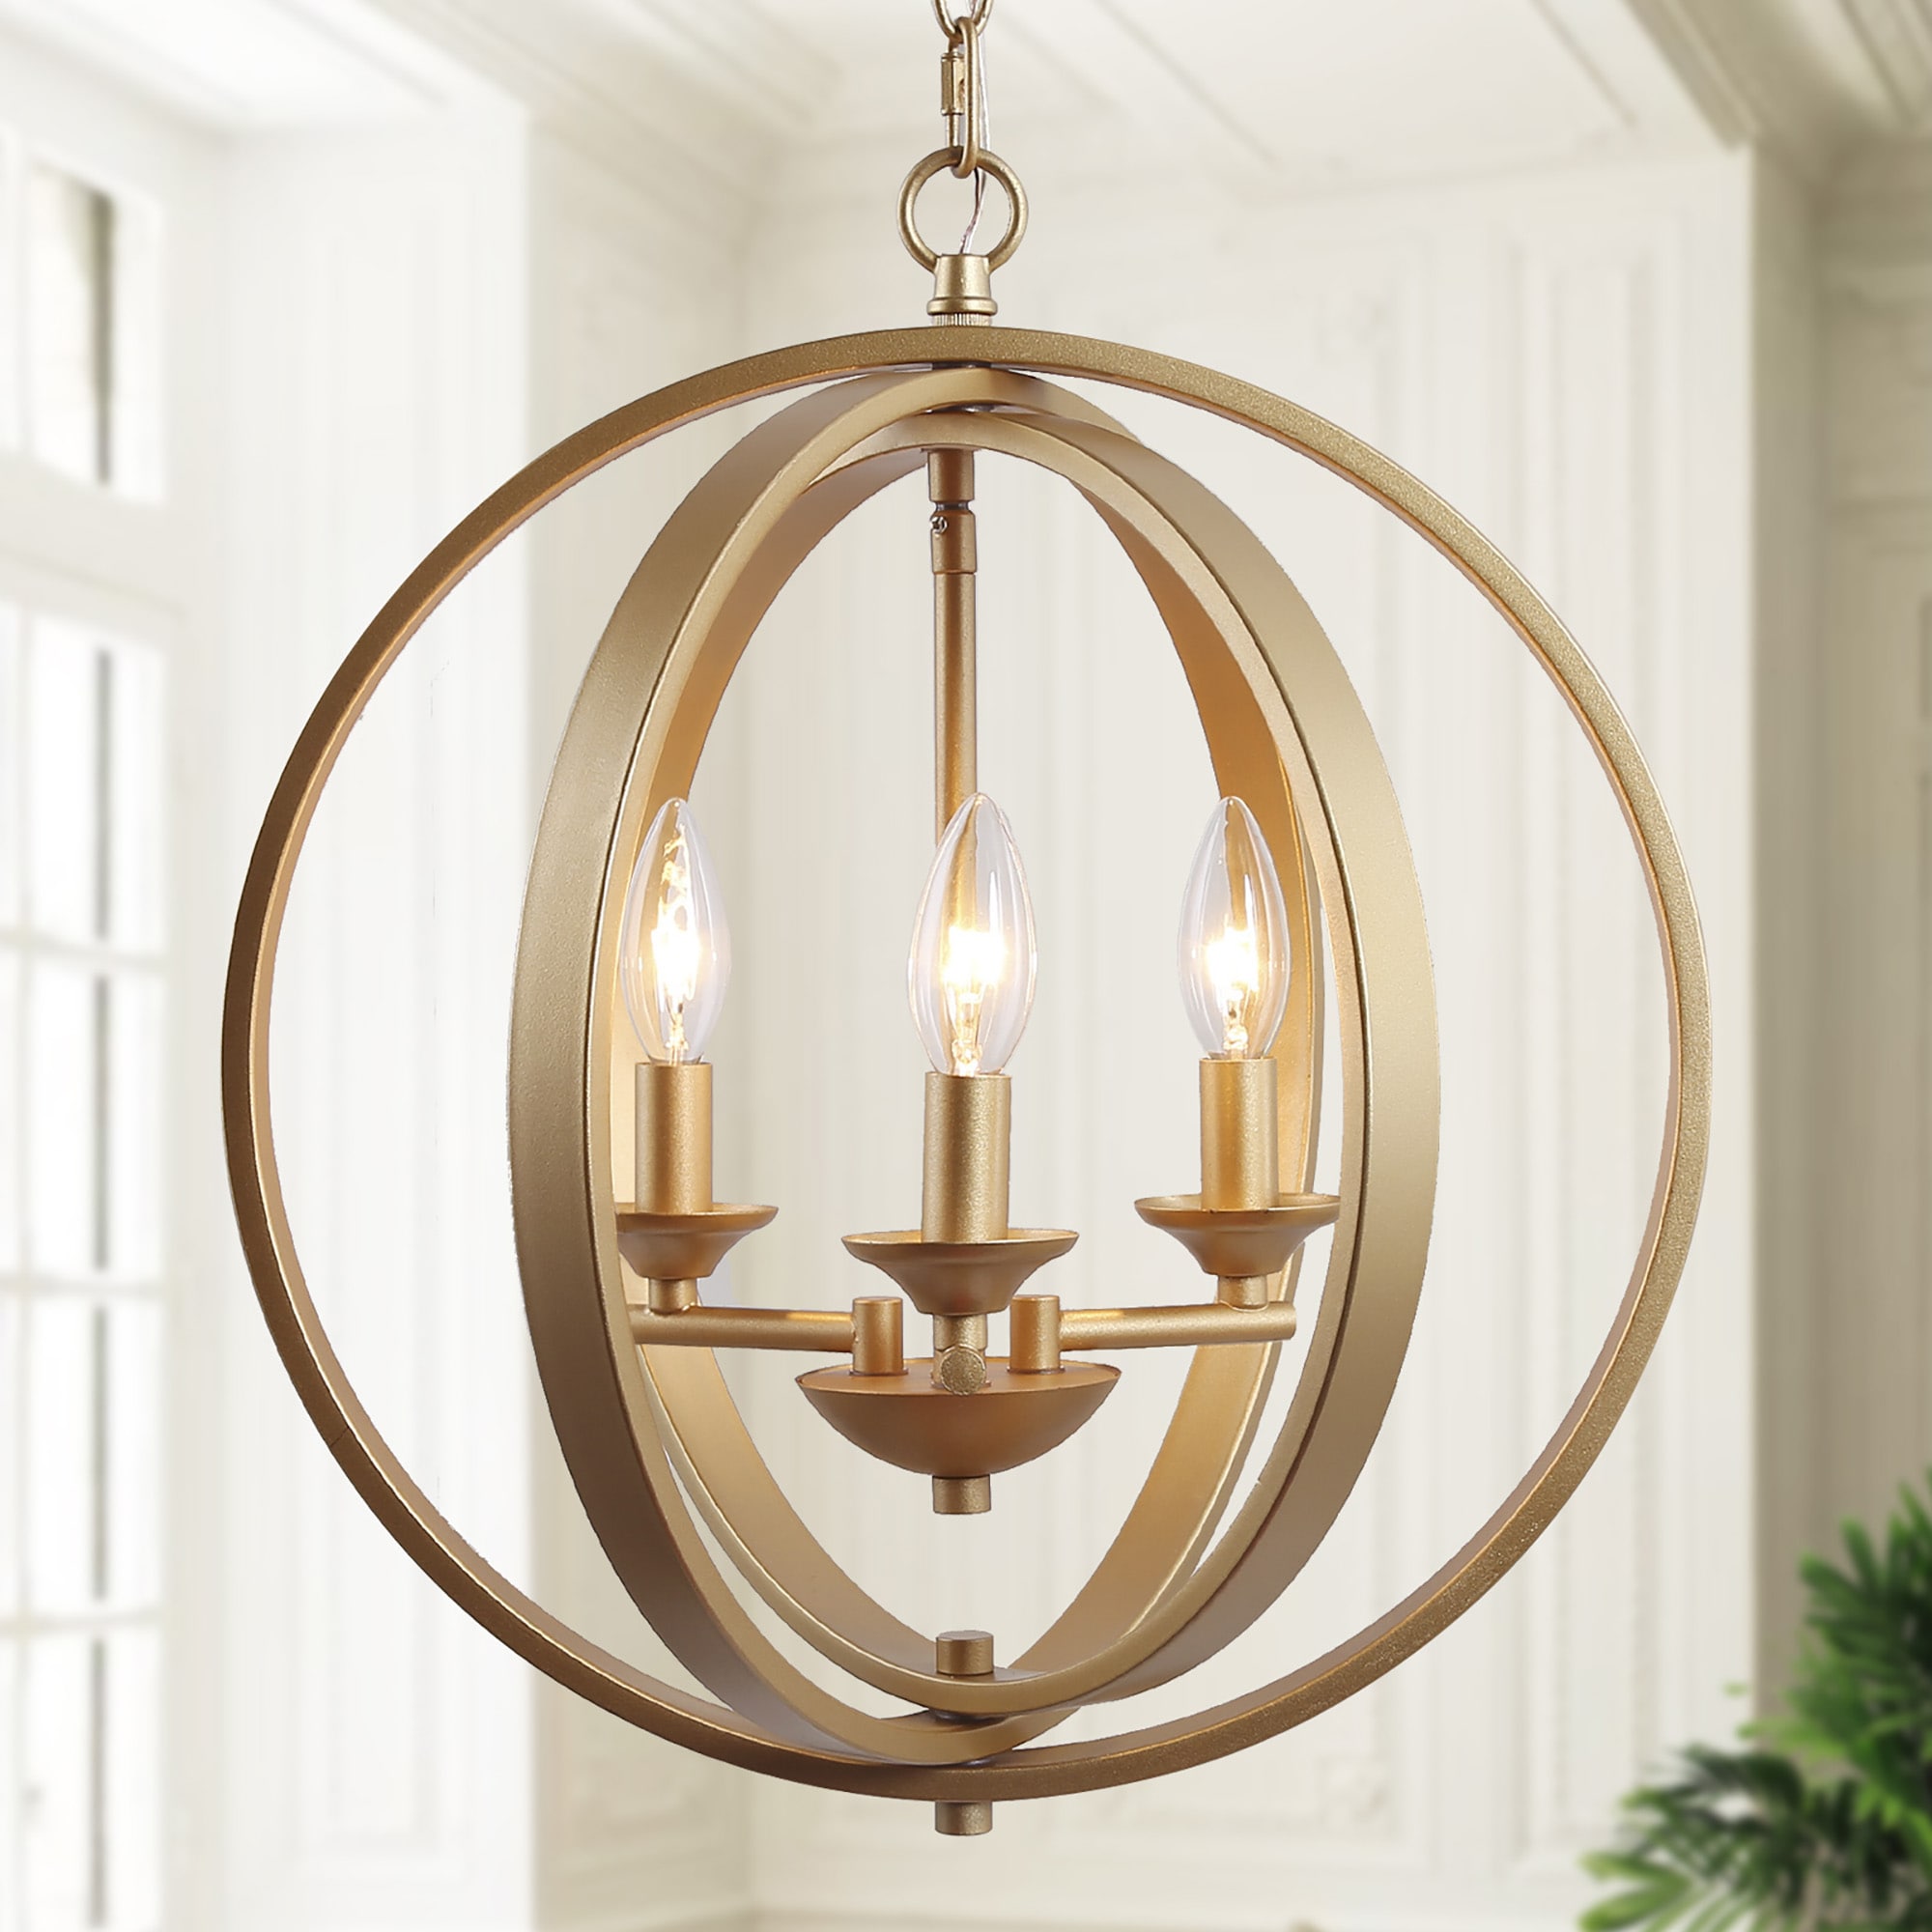 Candle Globe department rated Style the Modern/Contemporary Dry Chandeliers Classic 3-Light with Gold in Chandelier LED Uolfin at